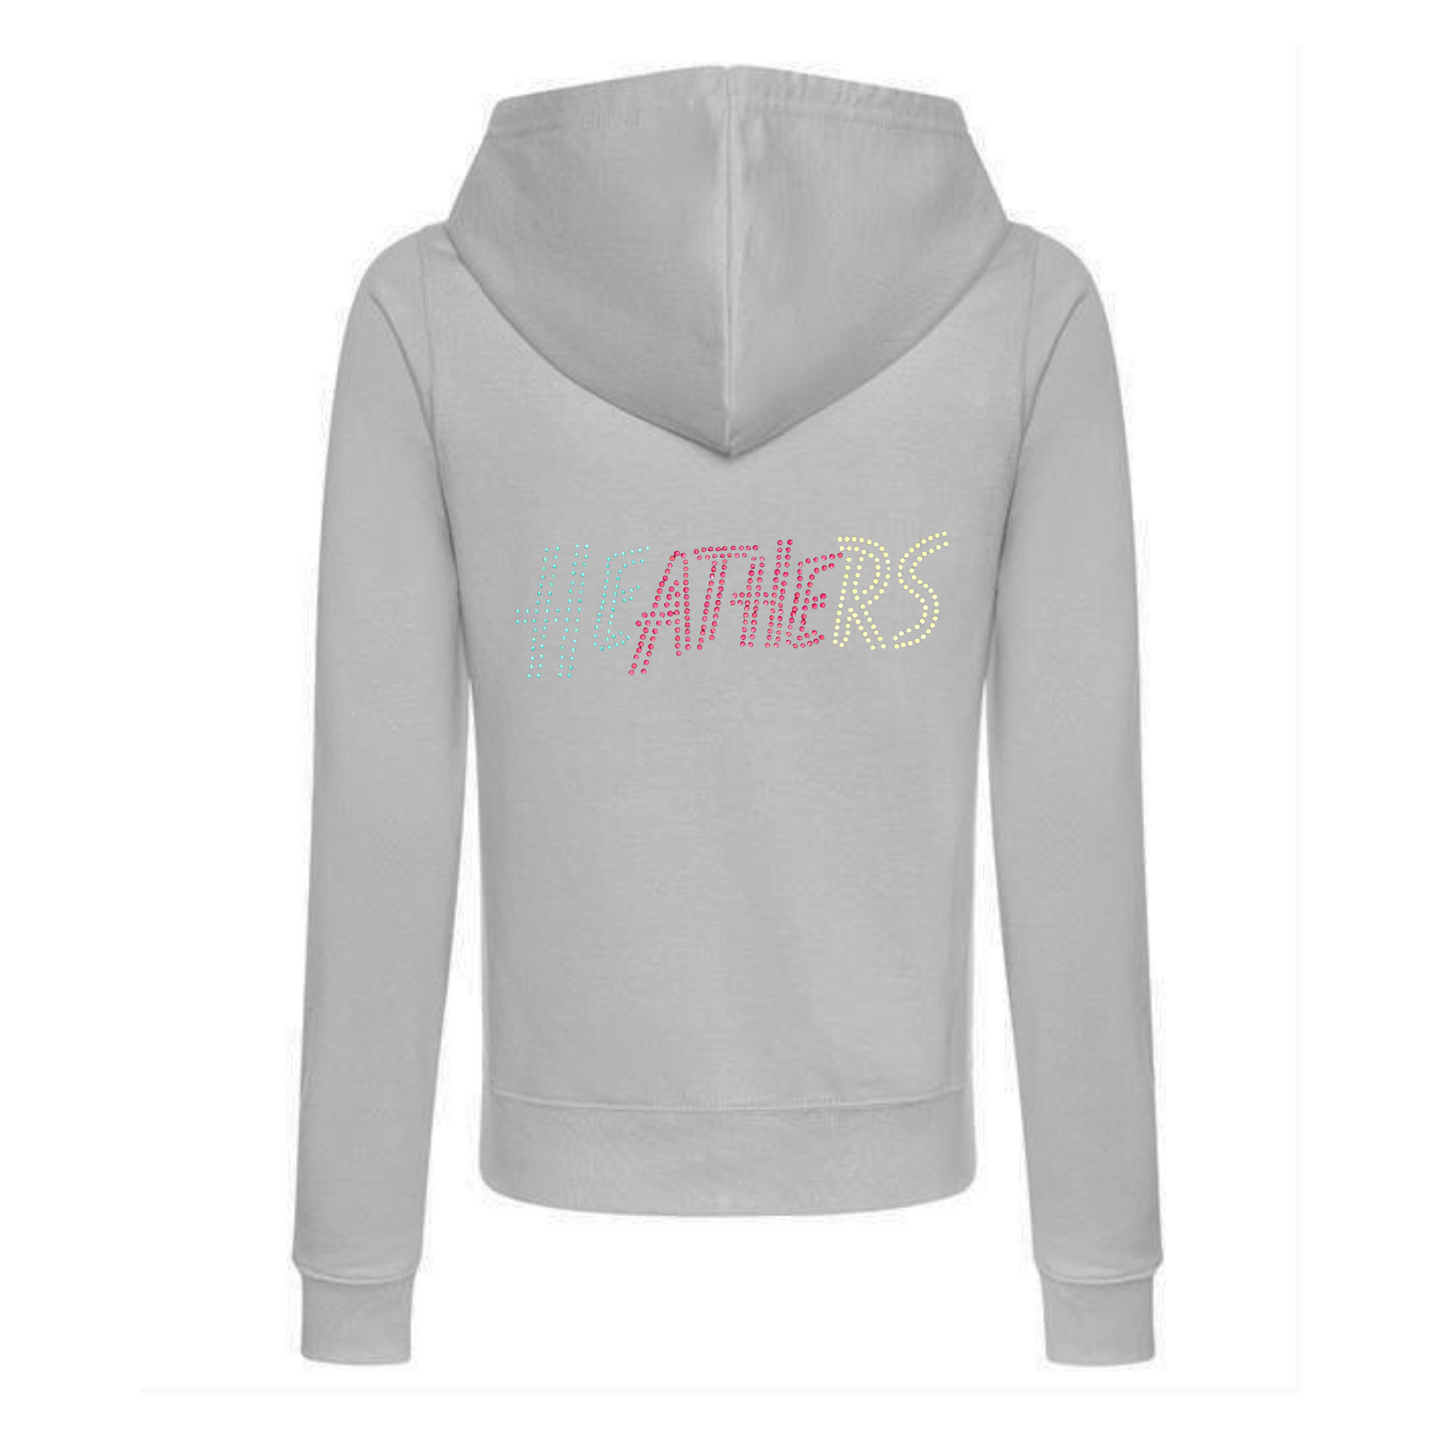 Heathers musical double design zipped hoodie